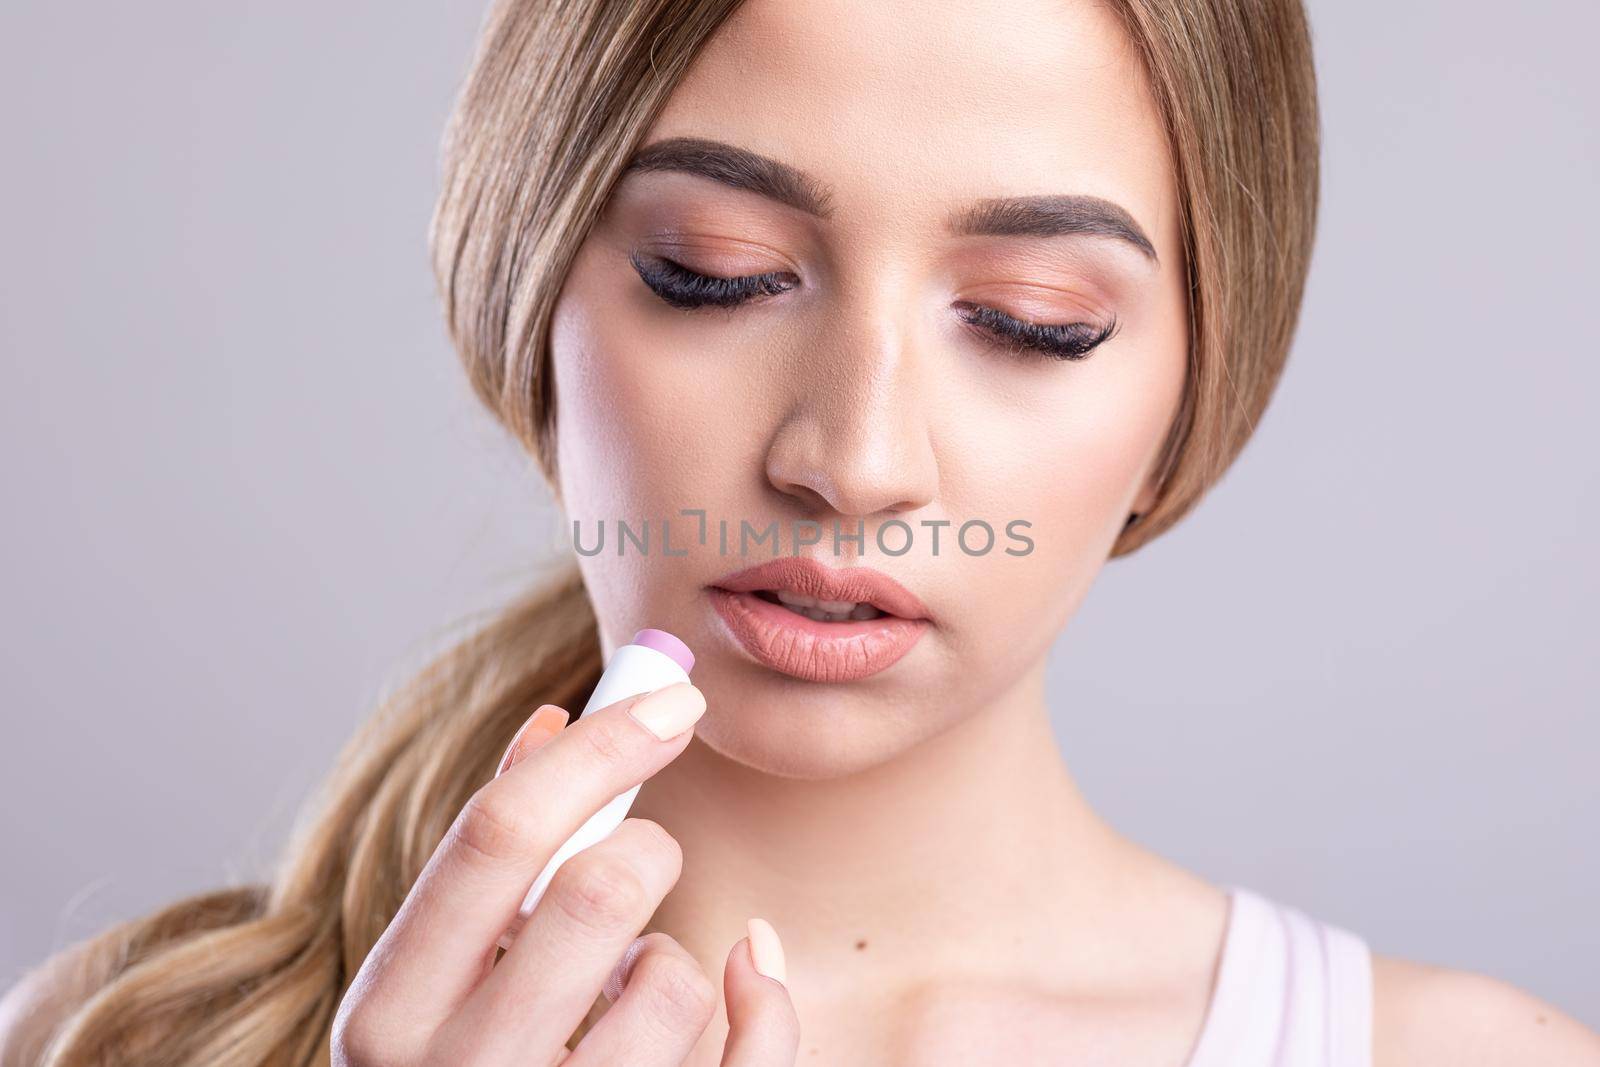 Beautiful Woman With Beauty Face Applying Lip Balsam, Lips Skin Care. Lipbalm On Sexy Lips. Portrait Of Female Model With Soft Skin And Natural Nude Makeup. High Resolution Stock Photo